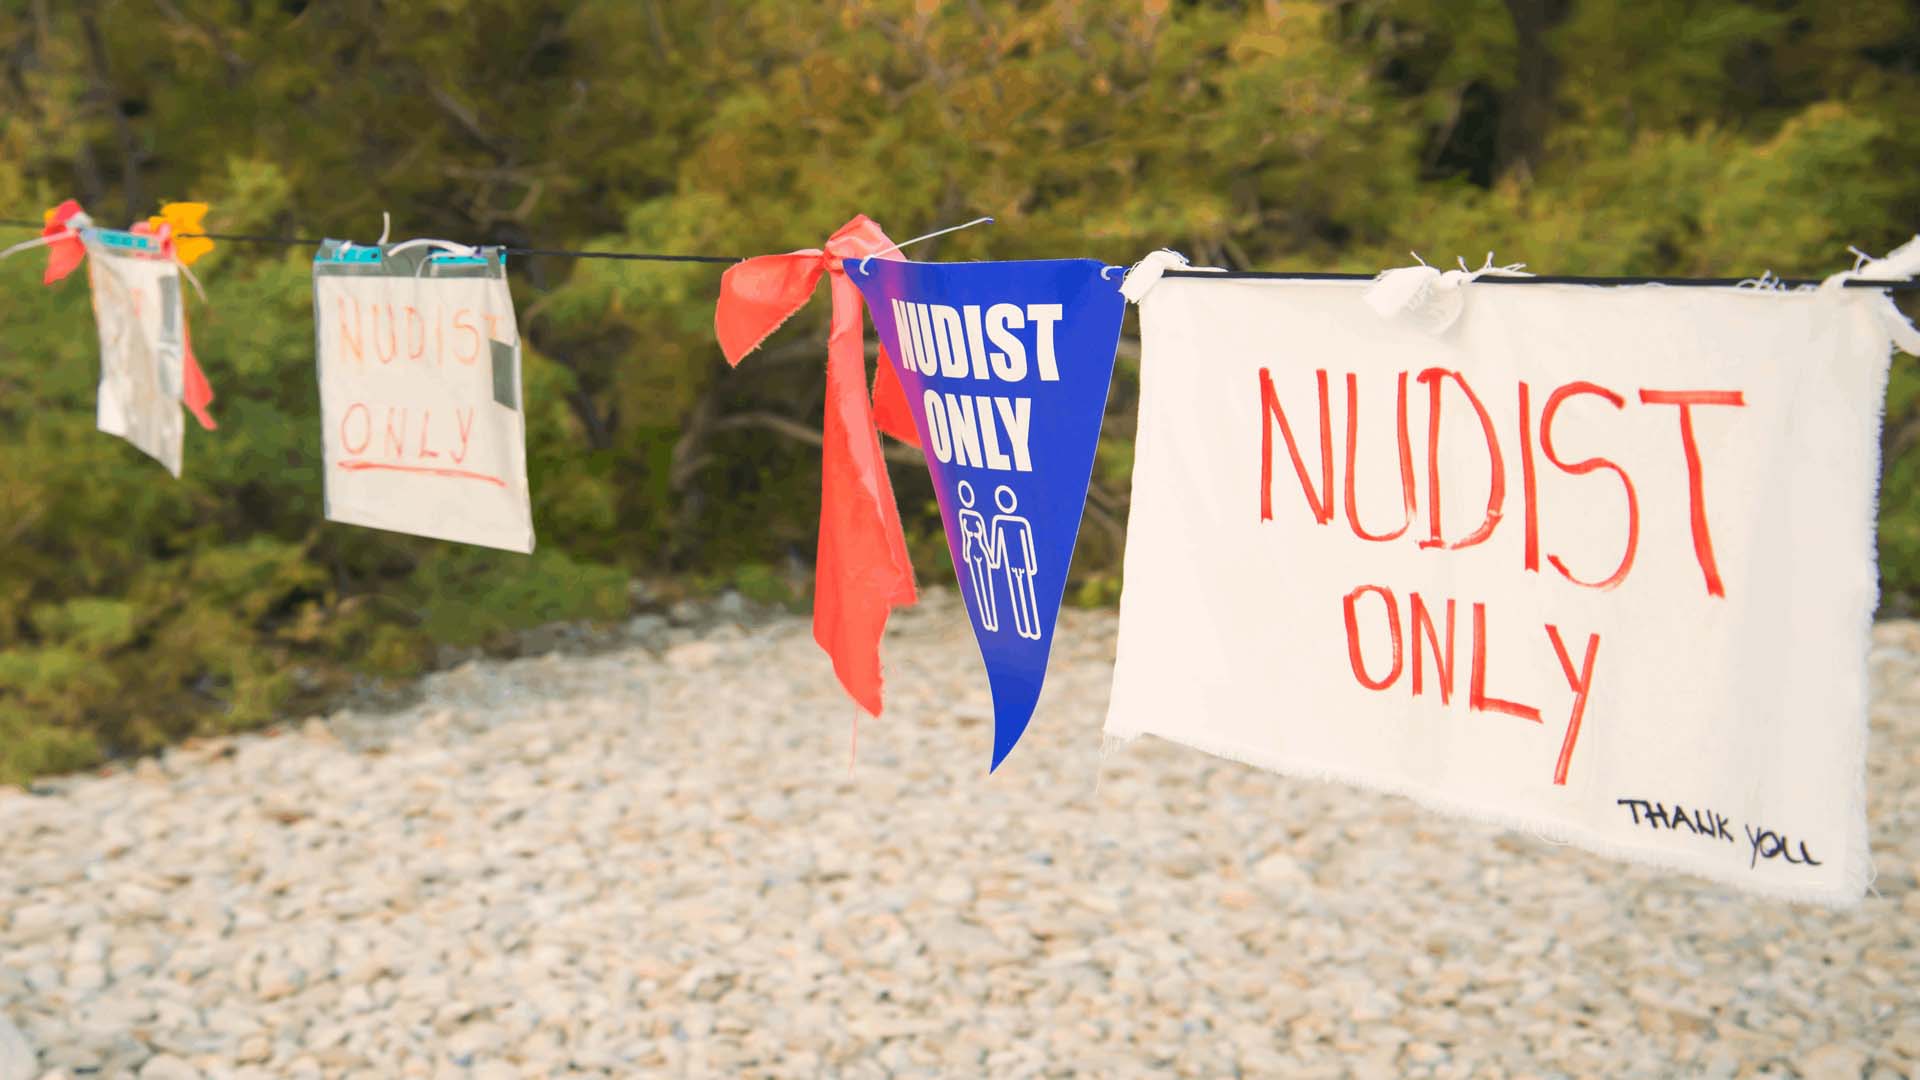 Bunting and signs signposting 'NUDIST ONLY'